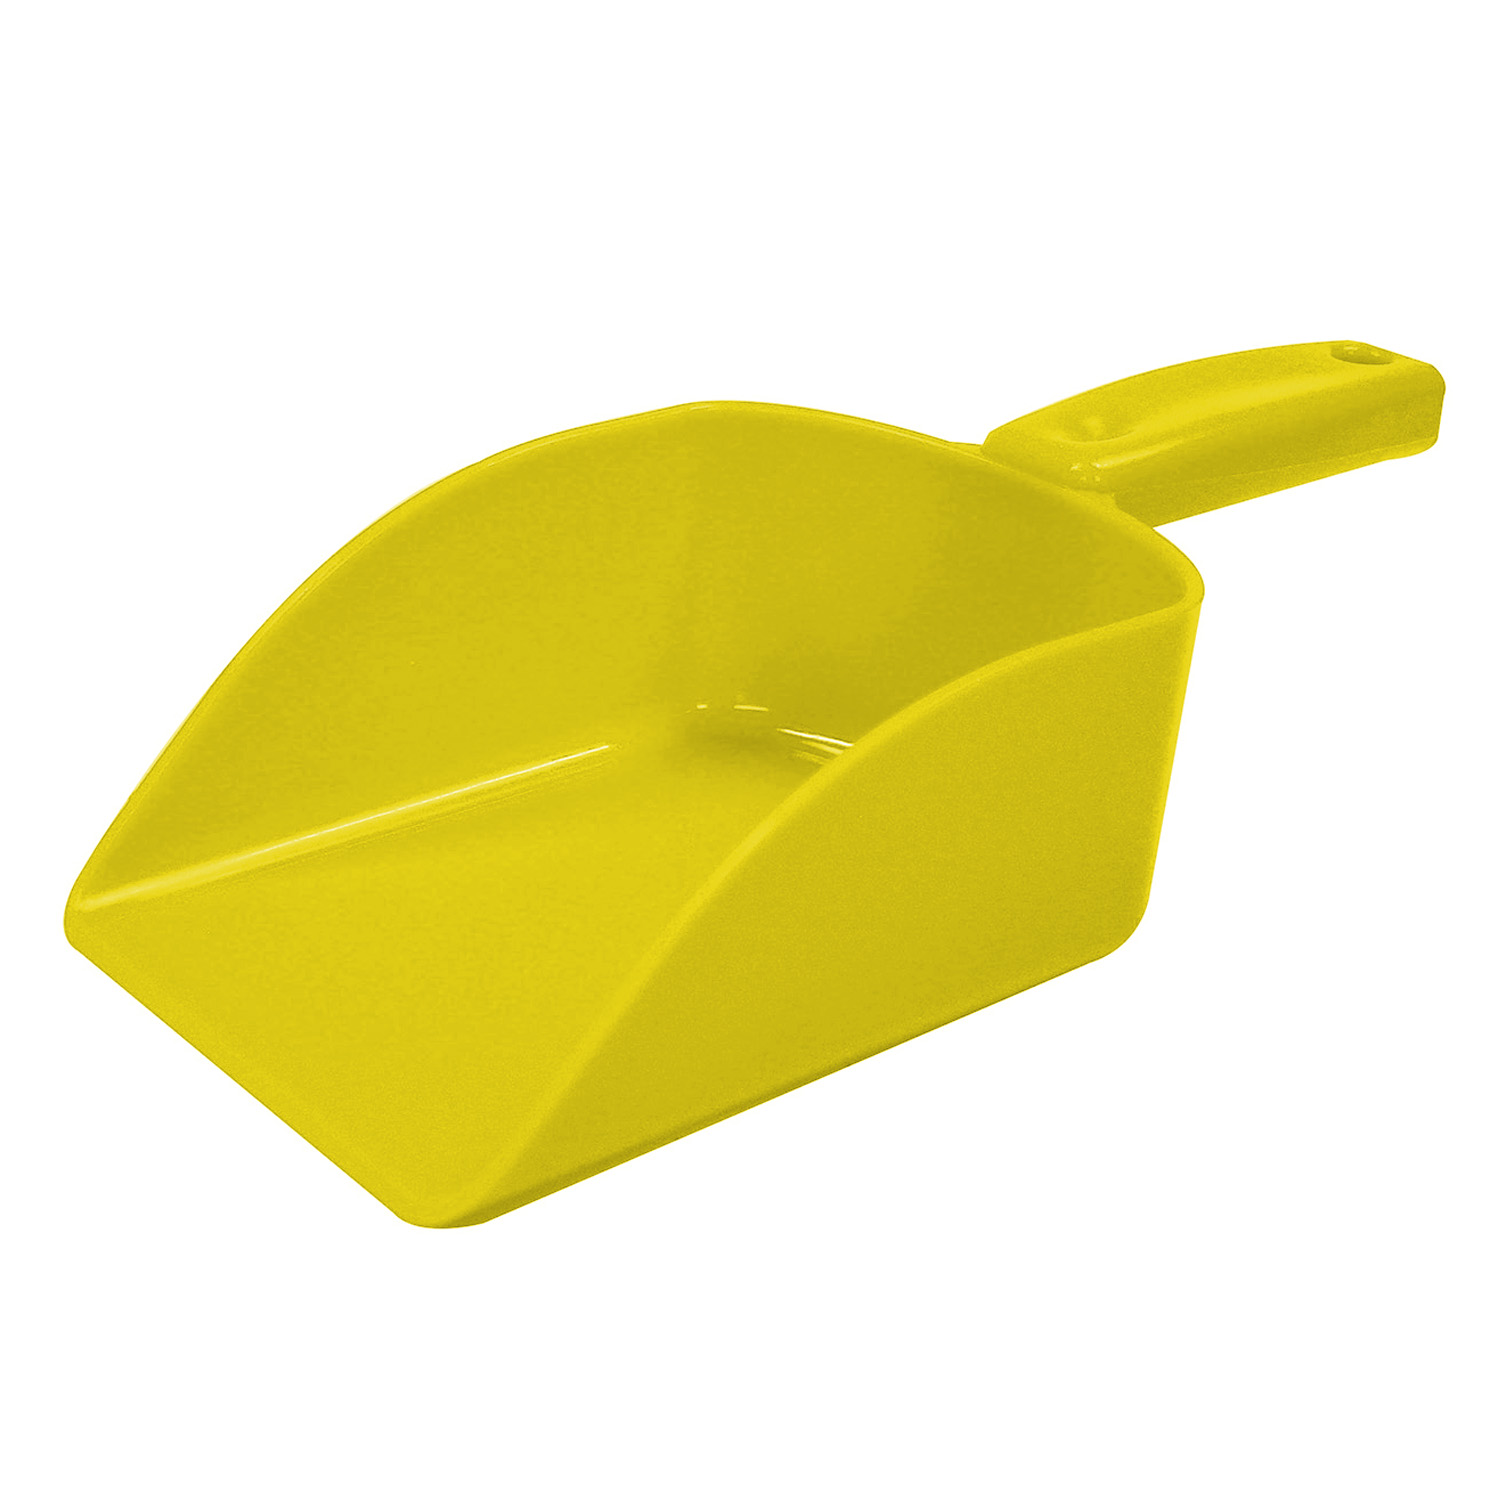 HILLBRUSH FEED SCOOP SMALL YELLOW SMALL